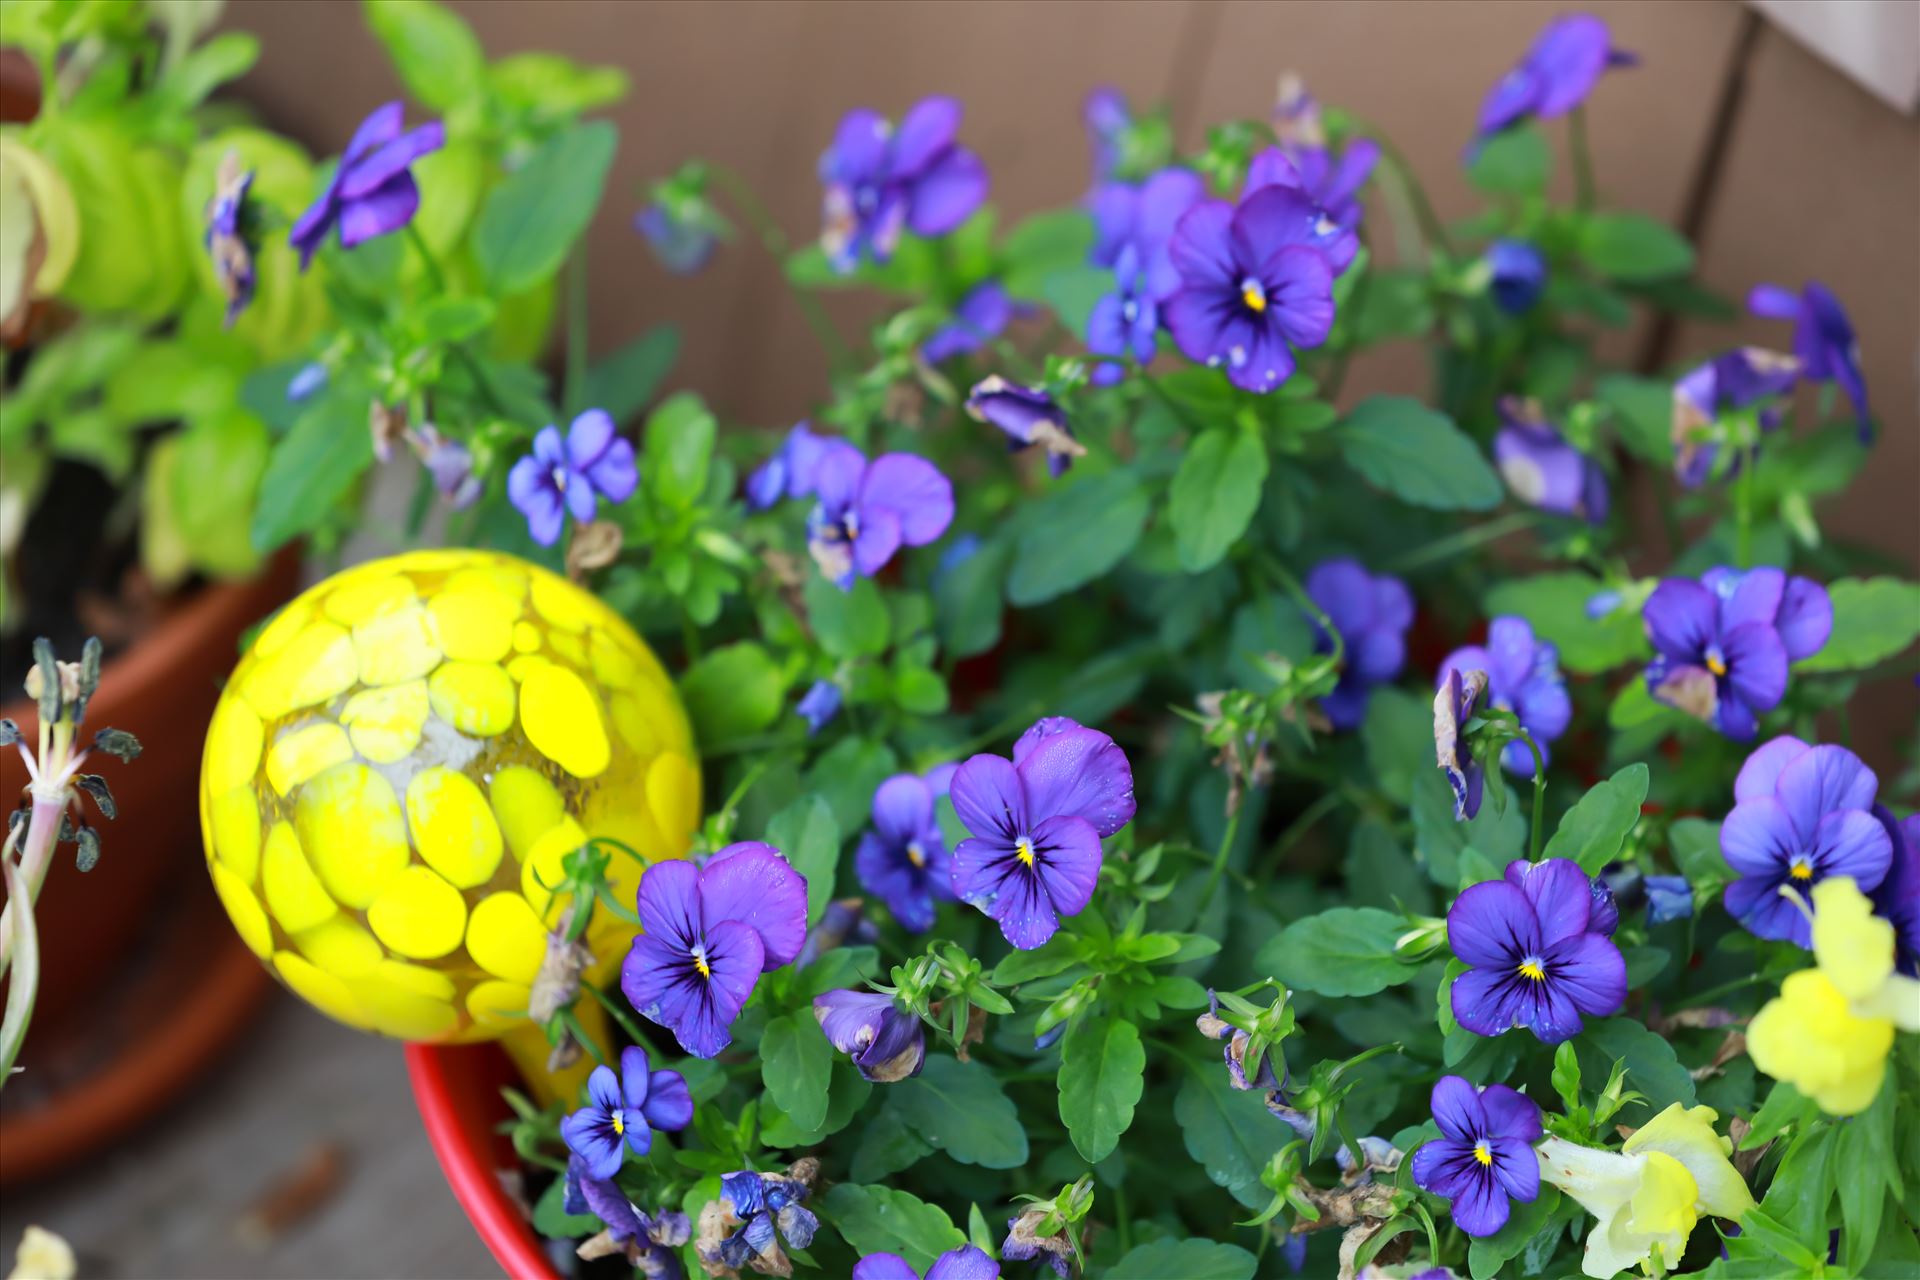 Around the Garden-8.jpg Purple pansies and yellow snapdragons with a glass water bulb by Cat Cornish Photography